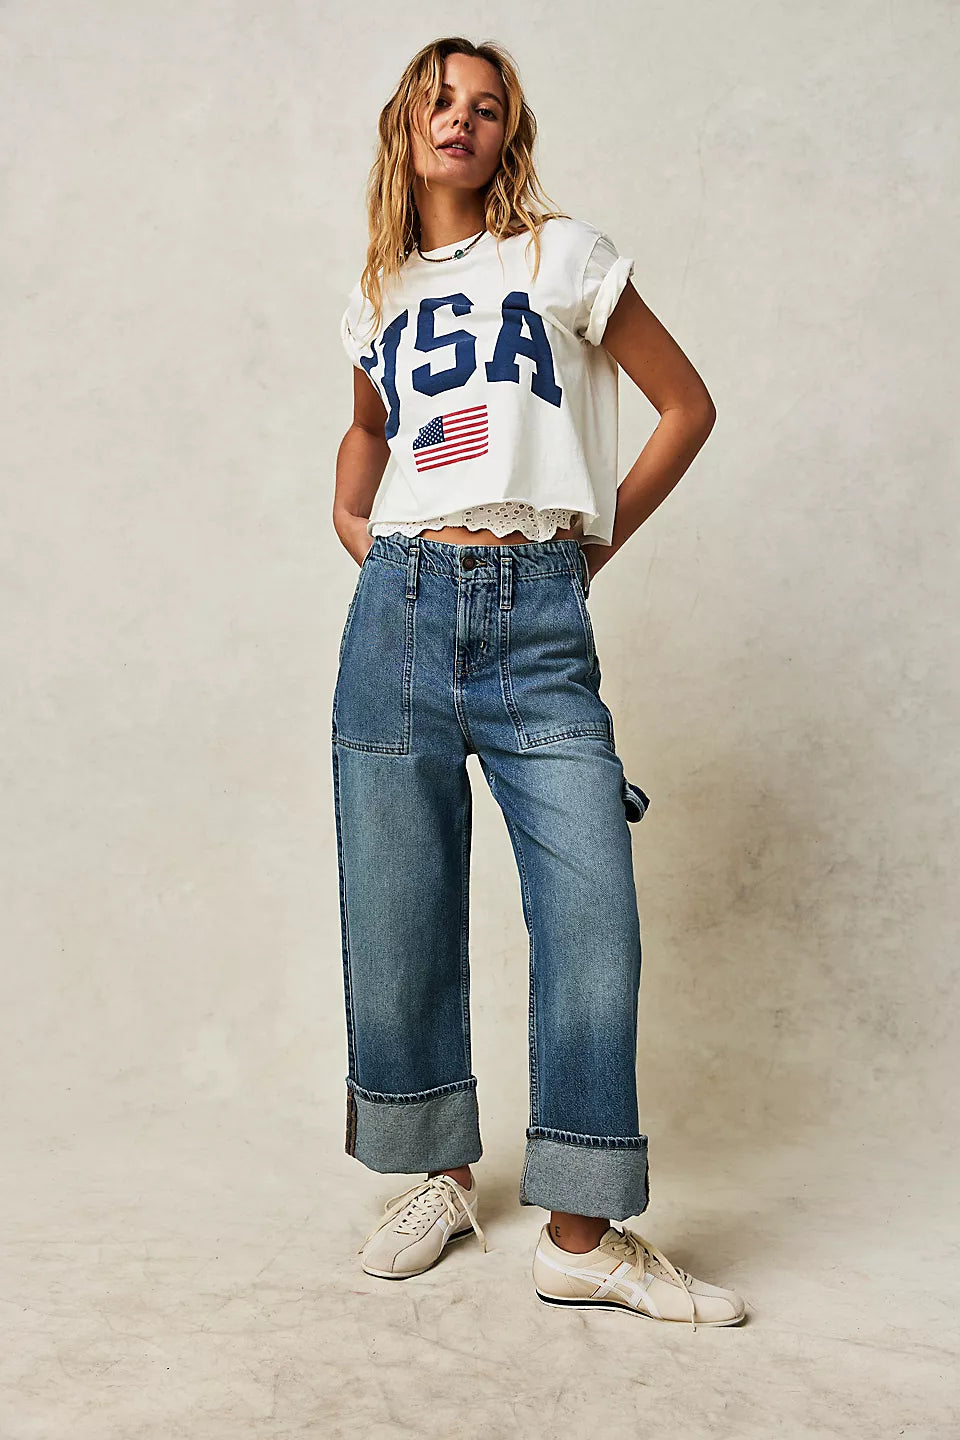 Free People - Major Leagues Mid-Rise Cuffed Jeans – Yes Doll